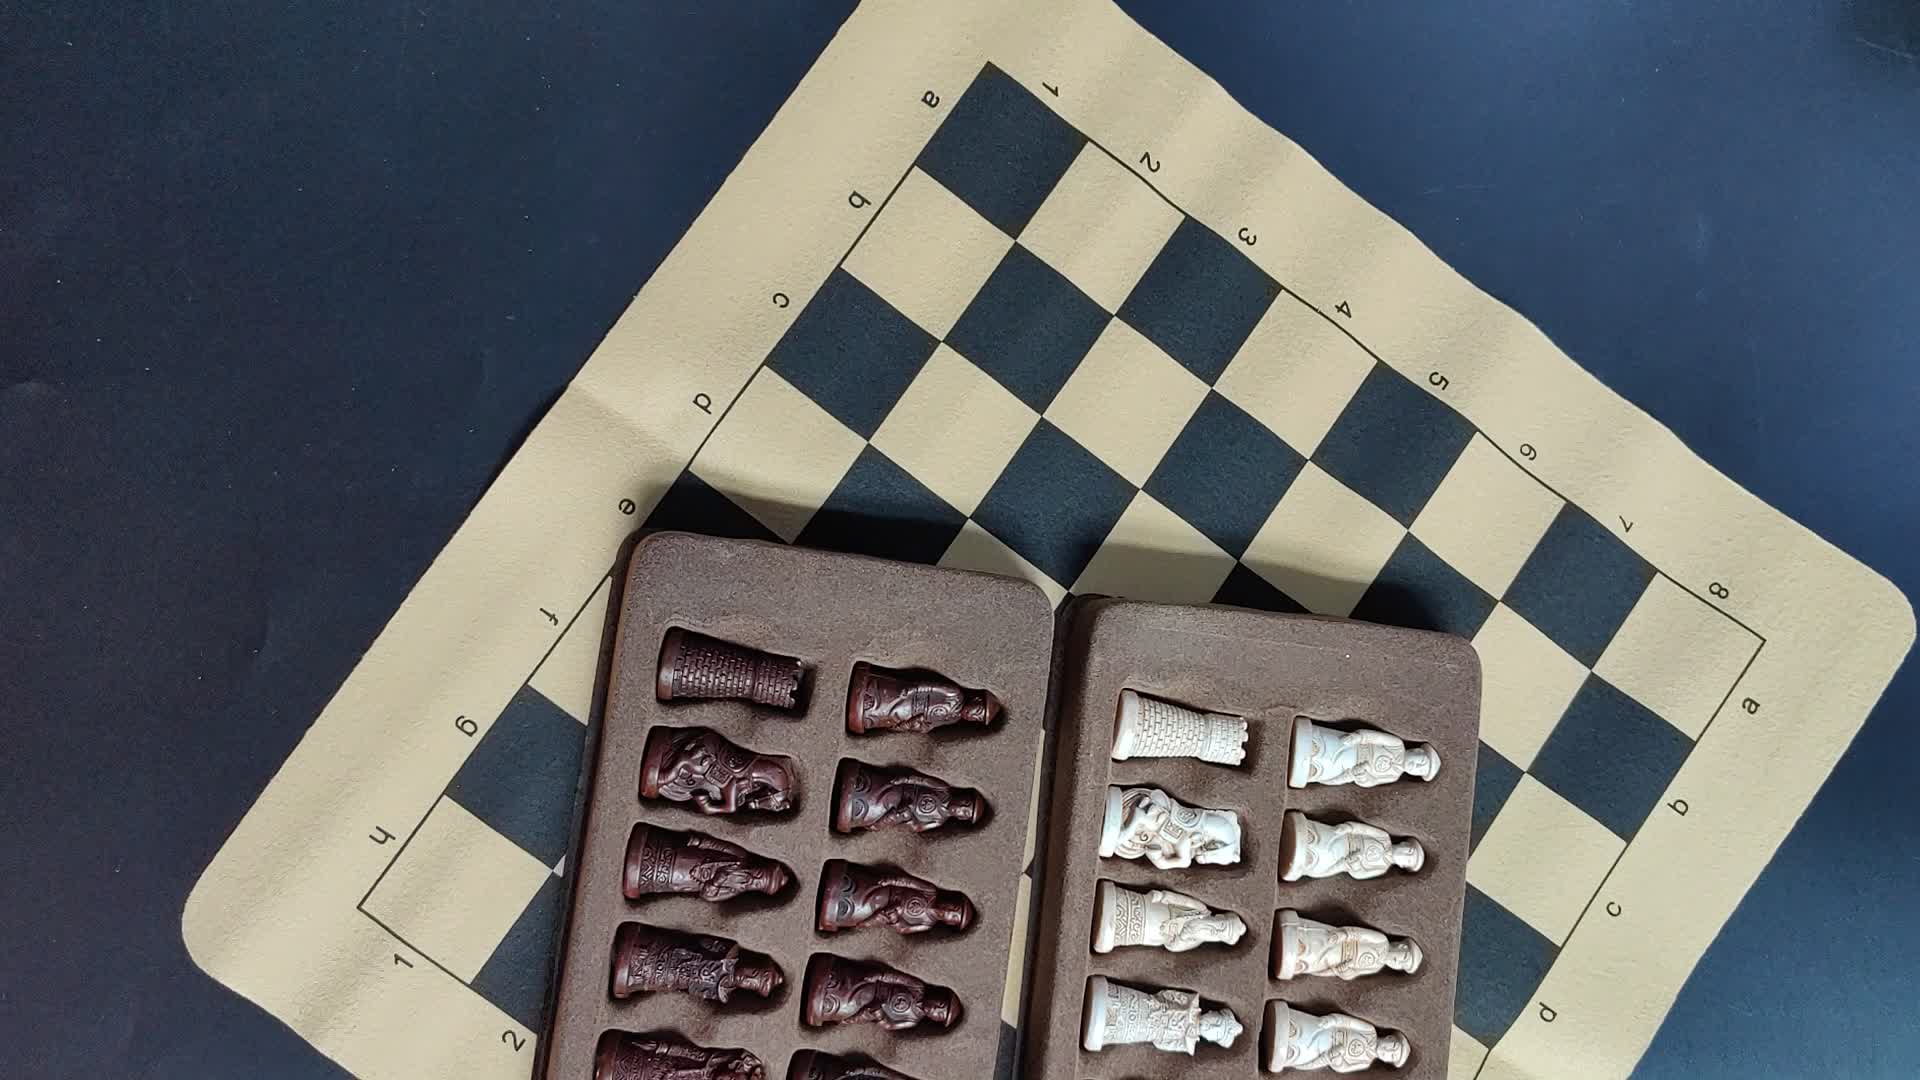 Antique Chess Large Chess Pieces Artificial Leather Chessboard Resin Chess  Pieces Character Modeling Gift Entertainment Game Box - Temu